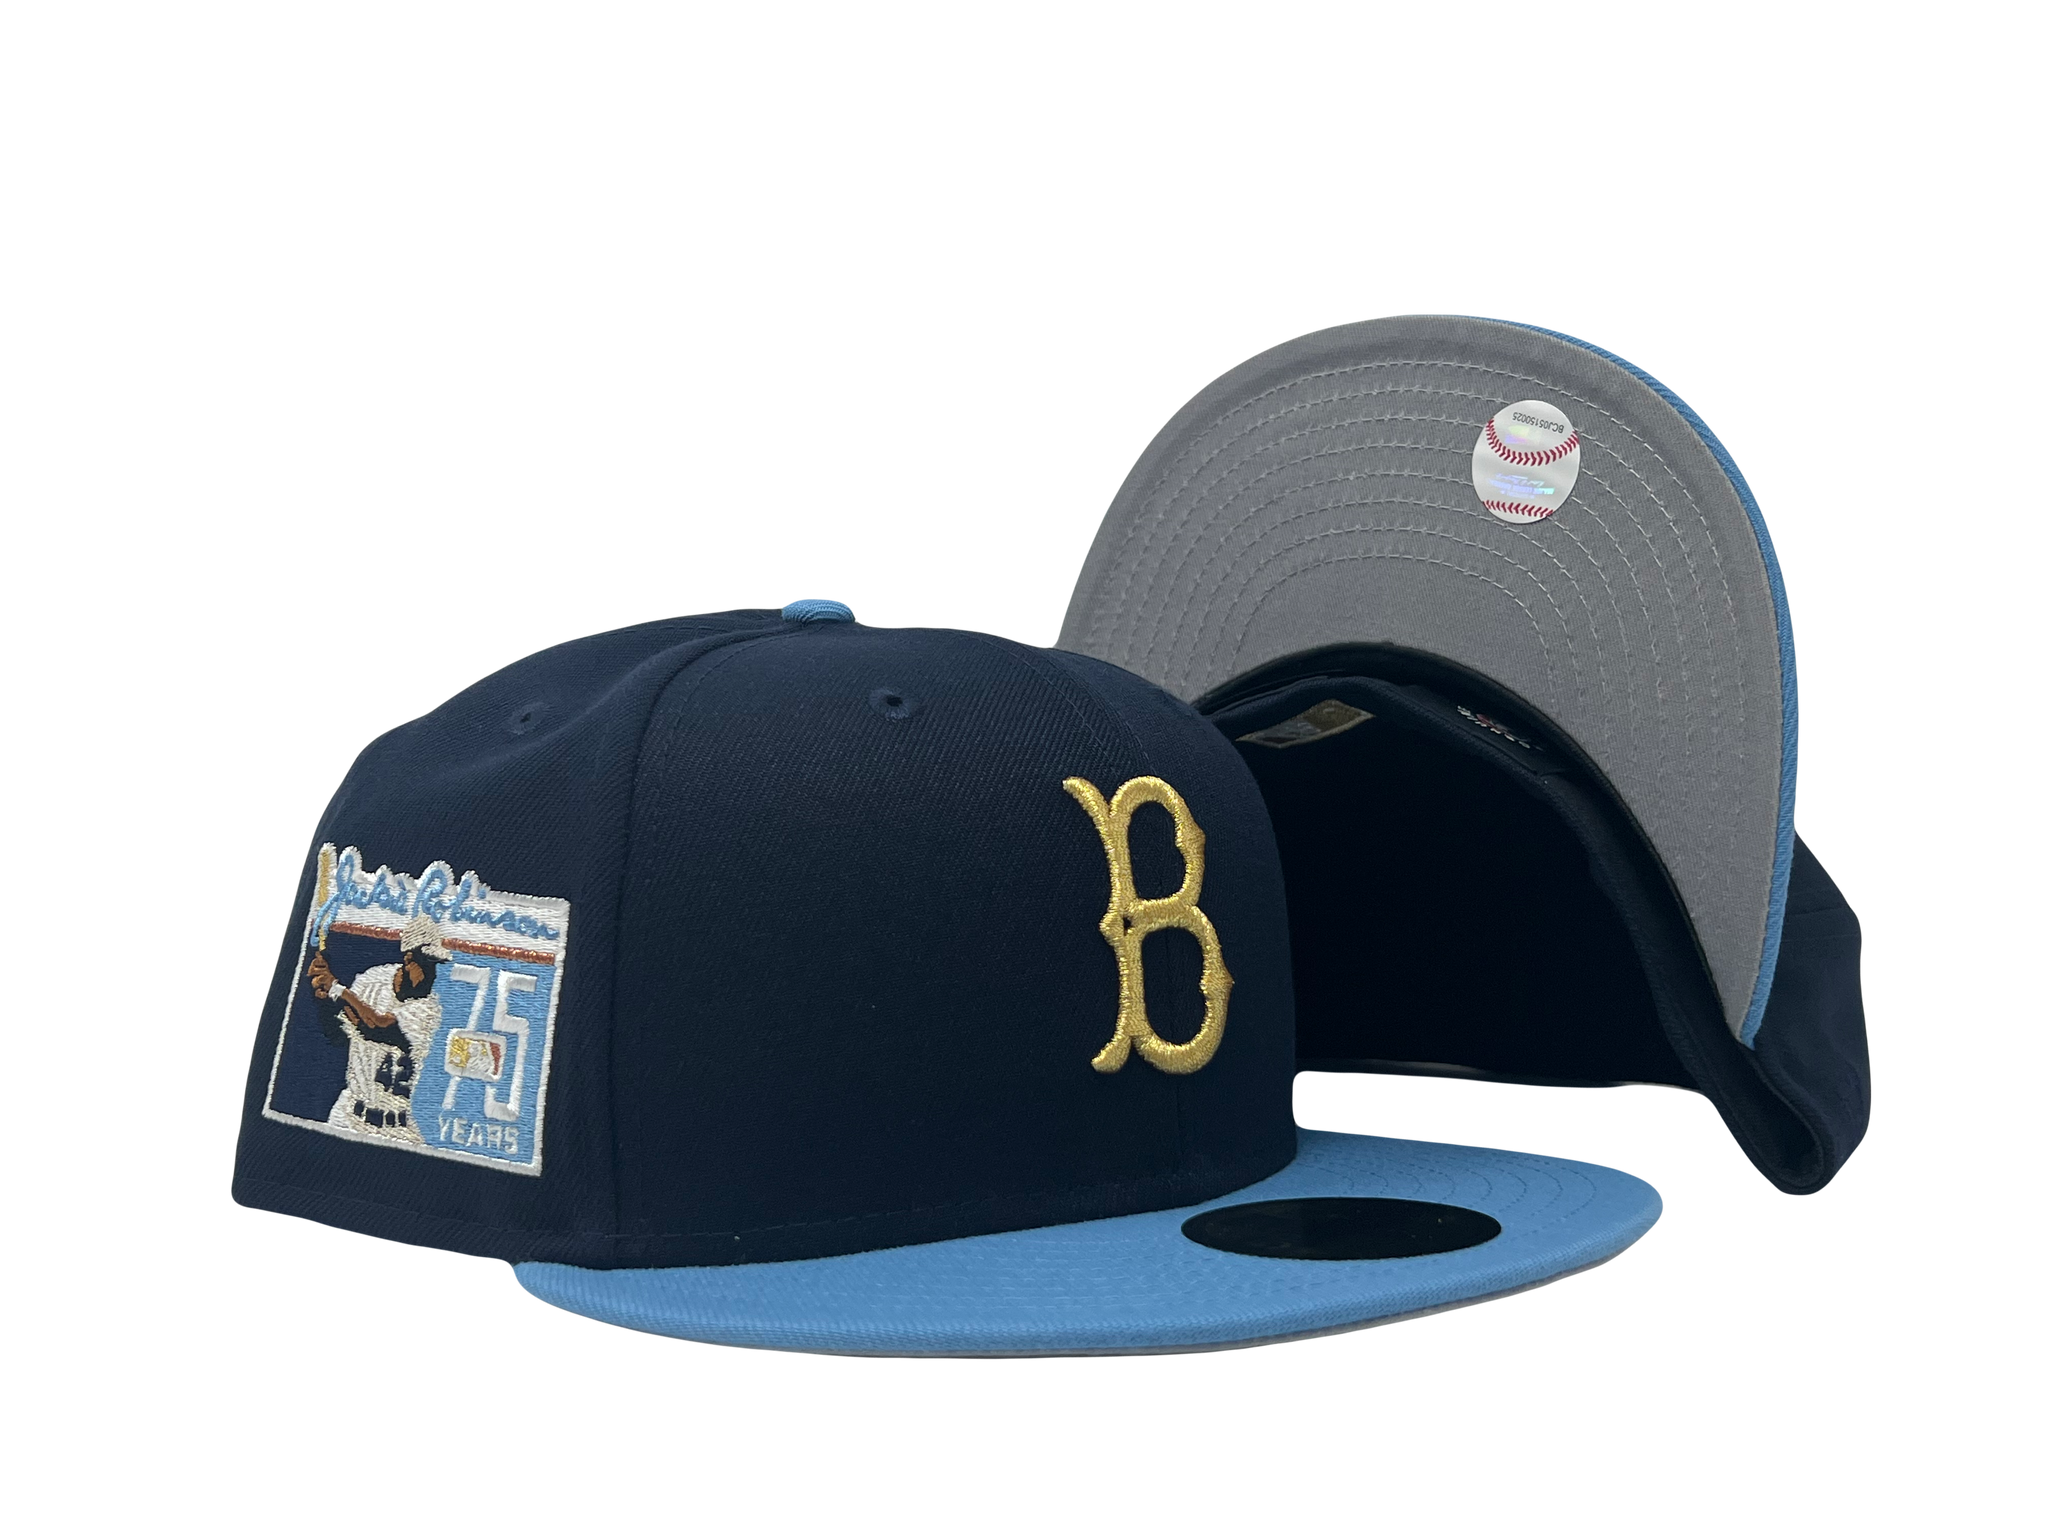 Black Jackie Robinson 75th Years 42 Side Patch New Era 9FIFTY Snapback